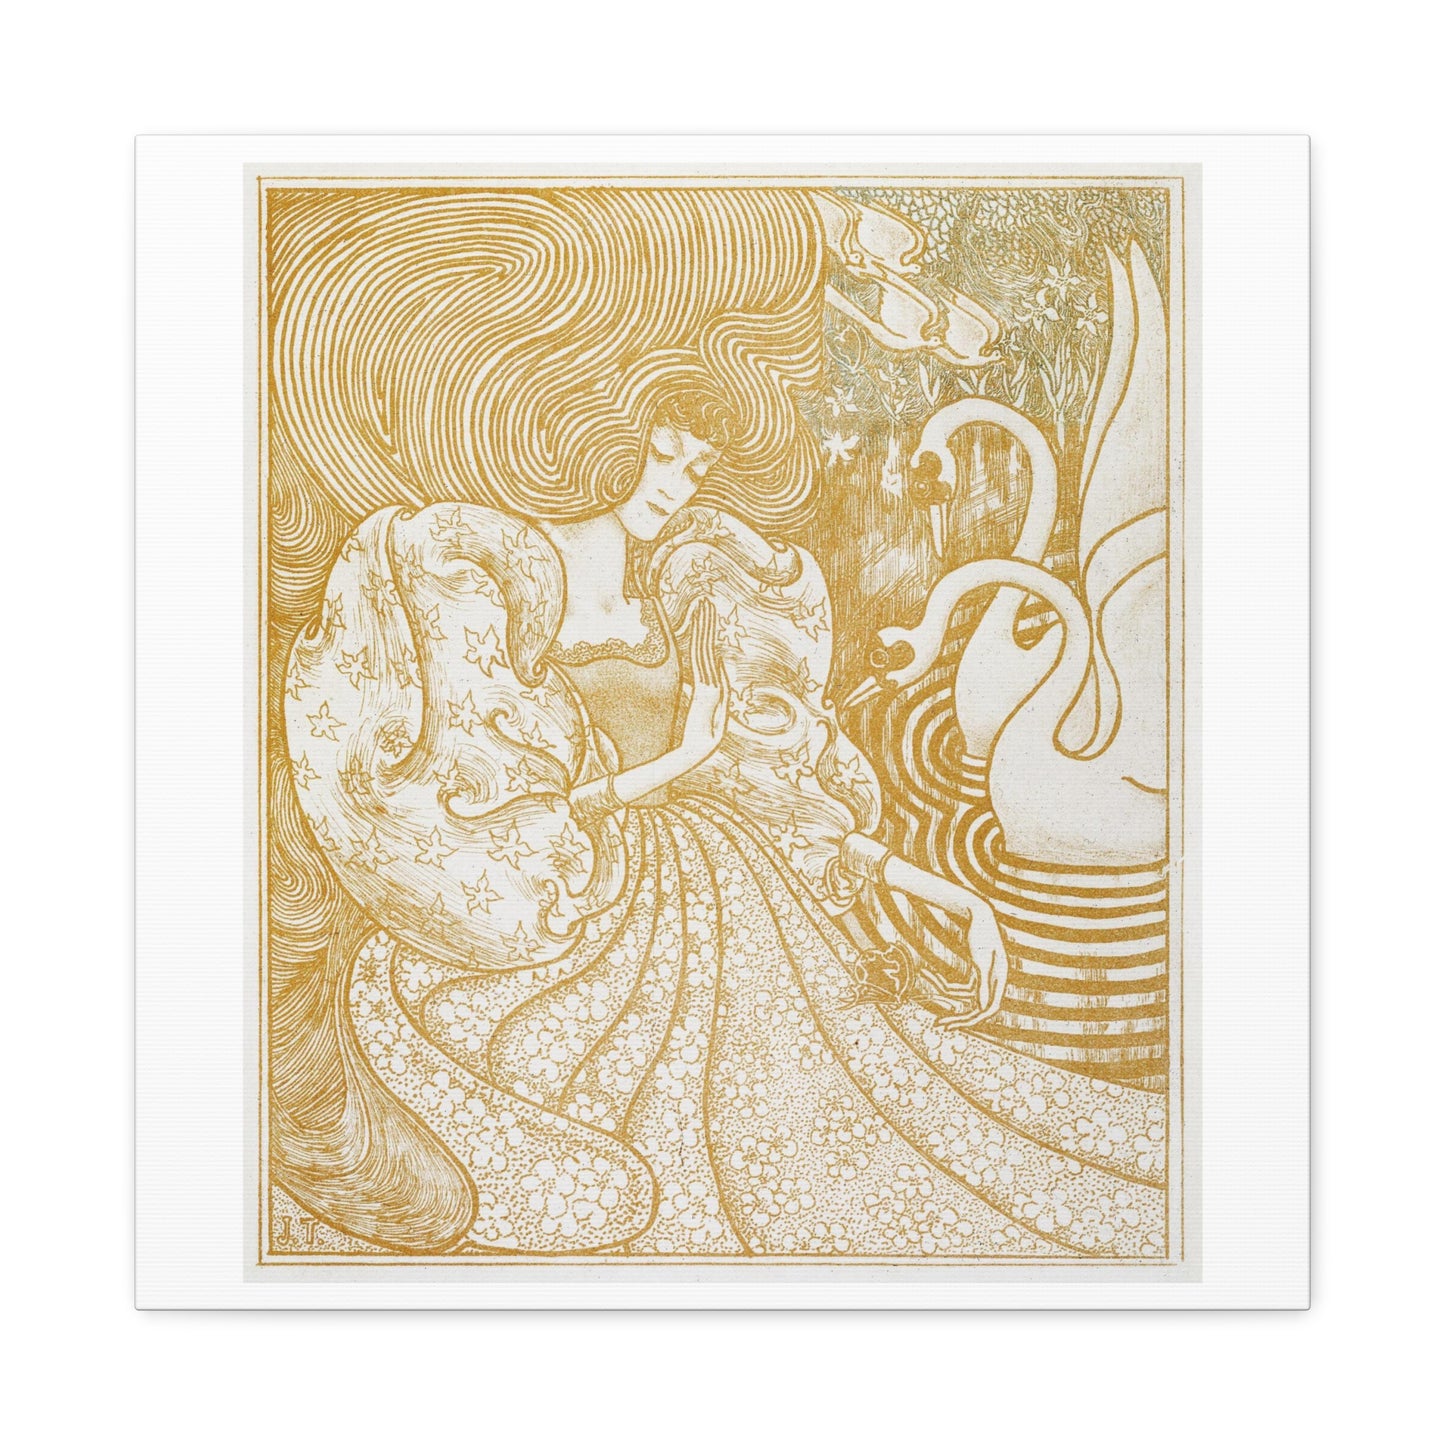 Woman with a Butterfly at a Pond with Two Swans (1894) by Jan Toorop, from the Original, Print on Canvas